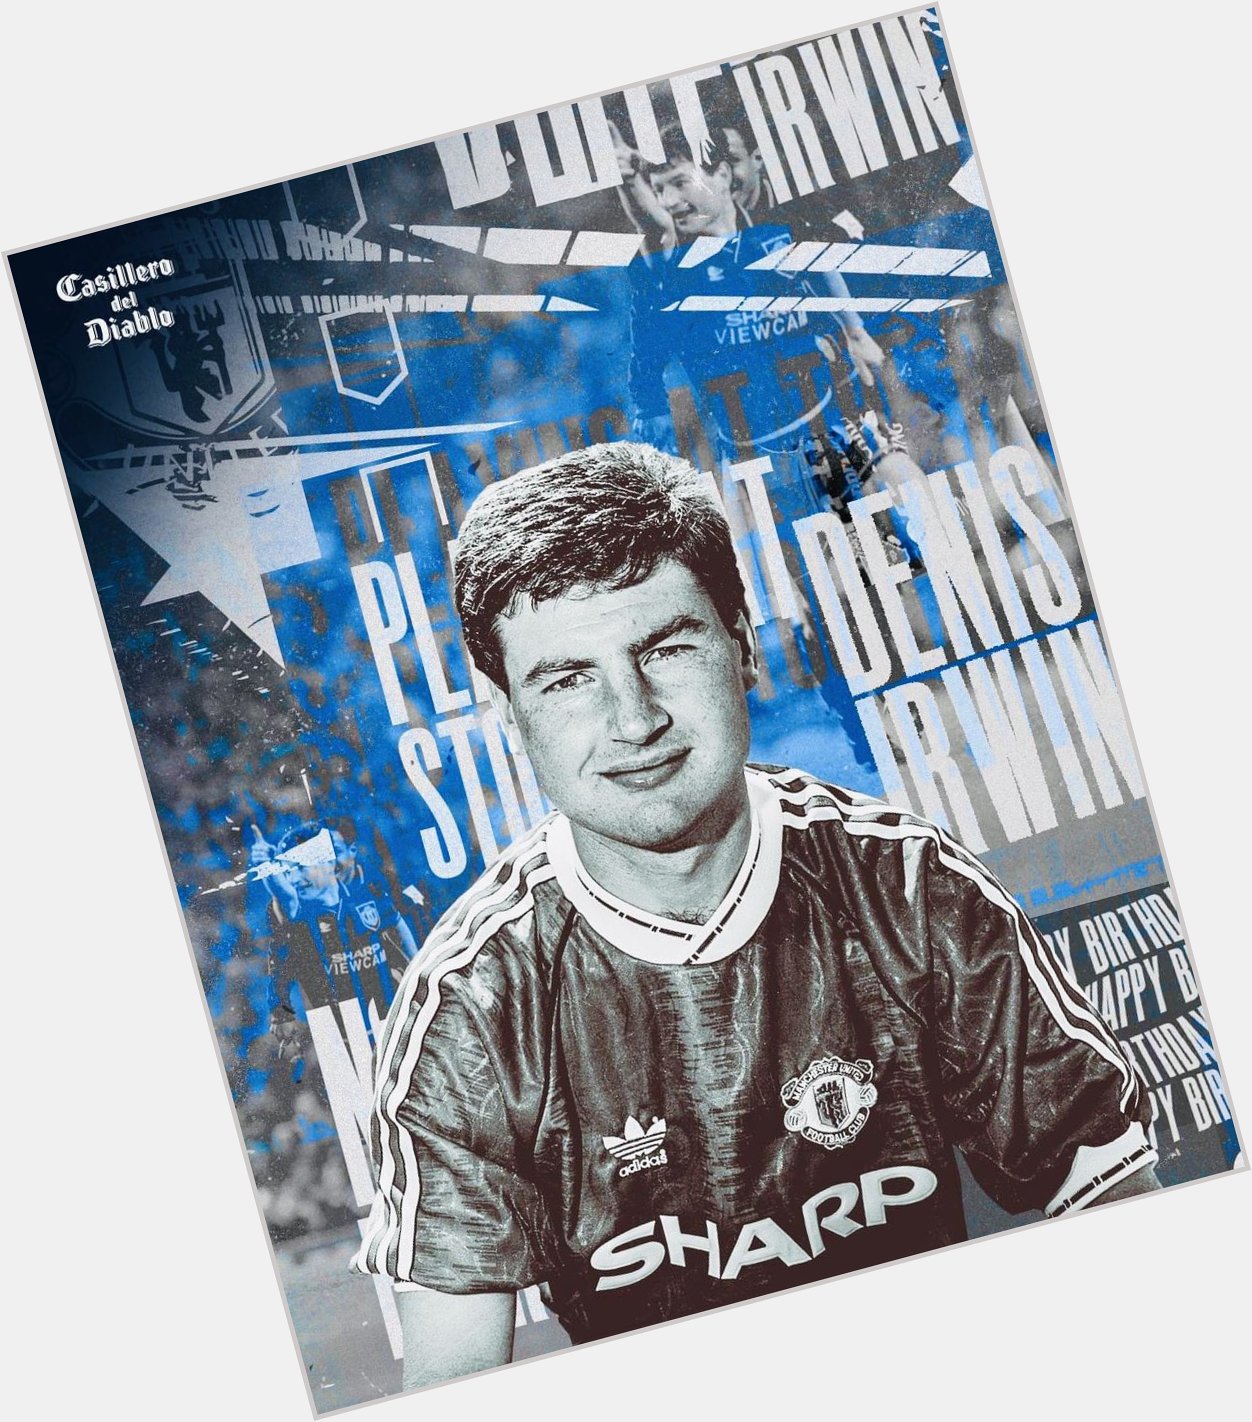 Manchester United !!!
Happy birthday to a legend of the club, Denis Irwin! 